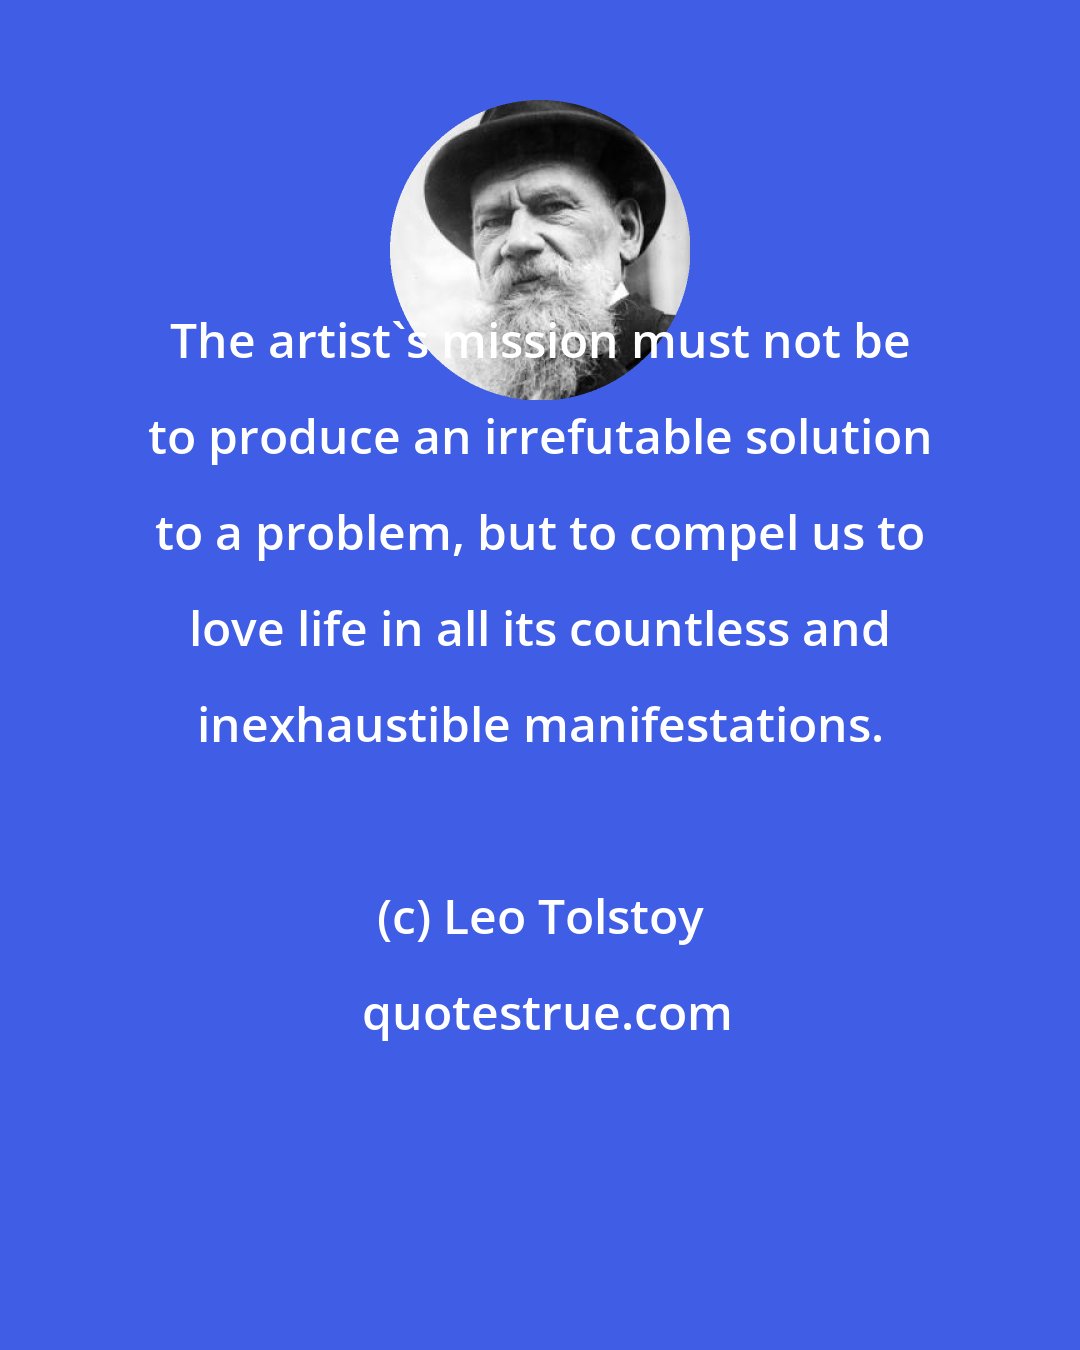 Leo Tolstoy: The artist's mission must not be to produce an irrefutable solution to a problem, but to compel us to love life in all its countless and inexhaustible manifestations.